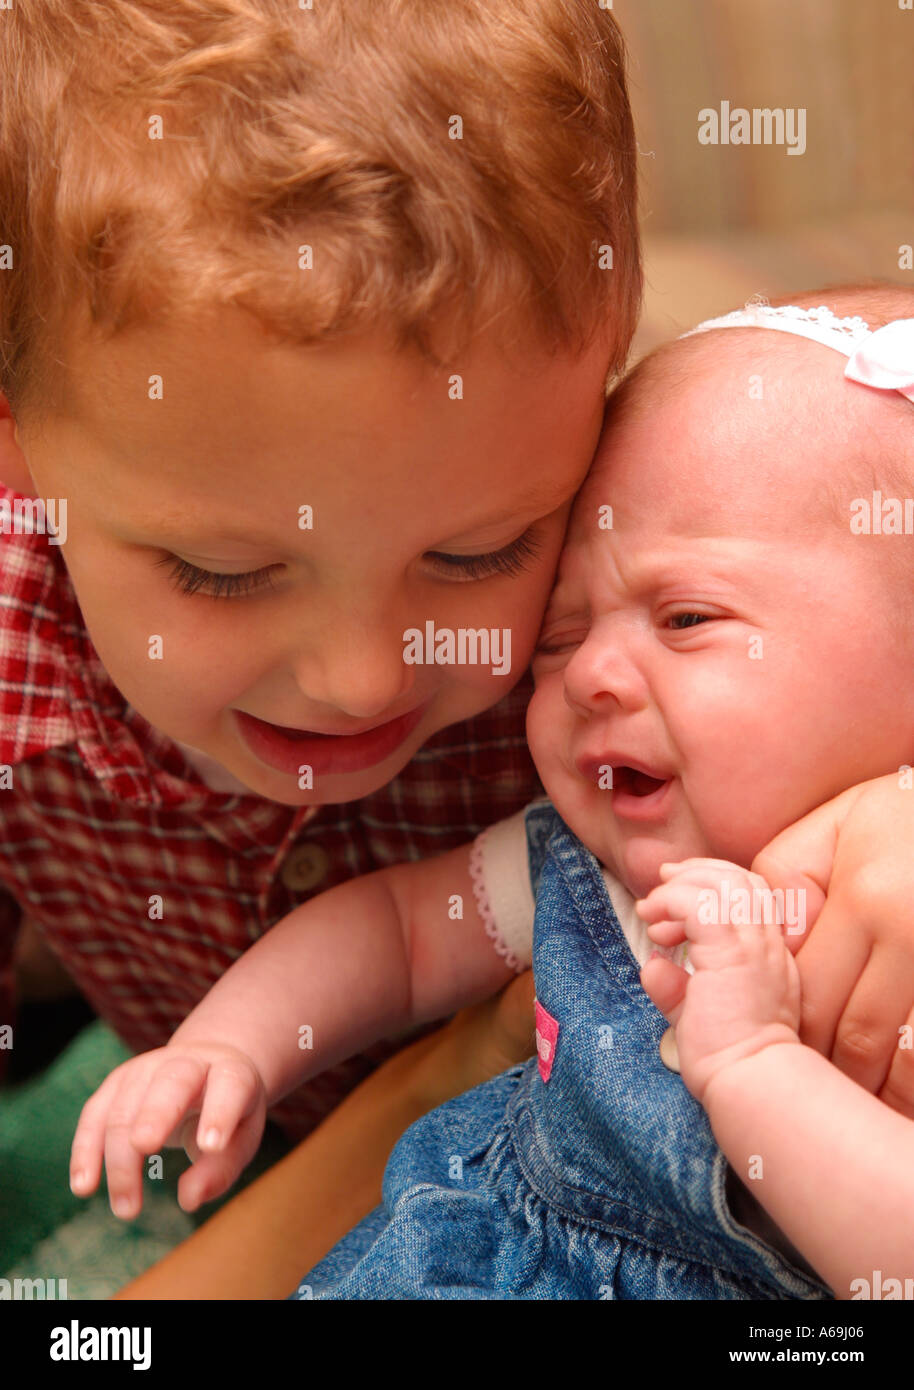 Baby gets a tight hug from big brother Stock Photo - Alamy